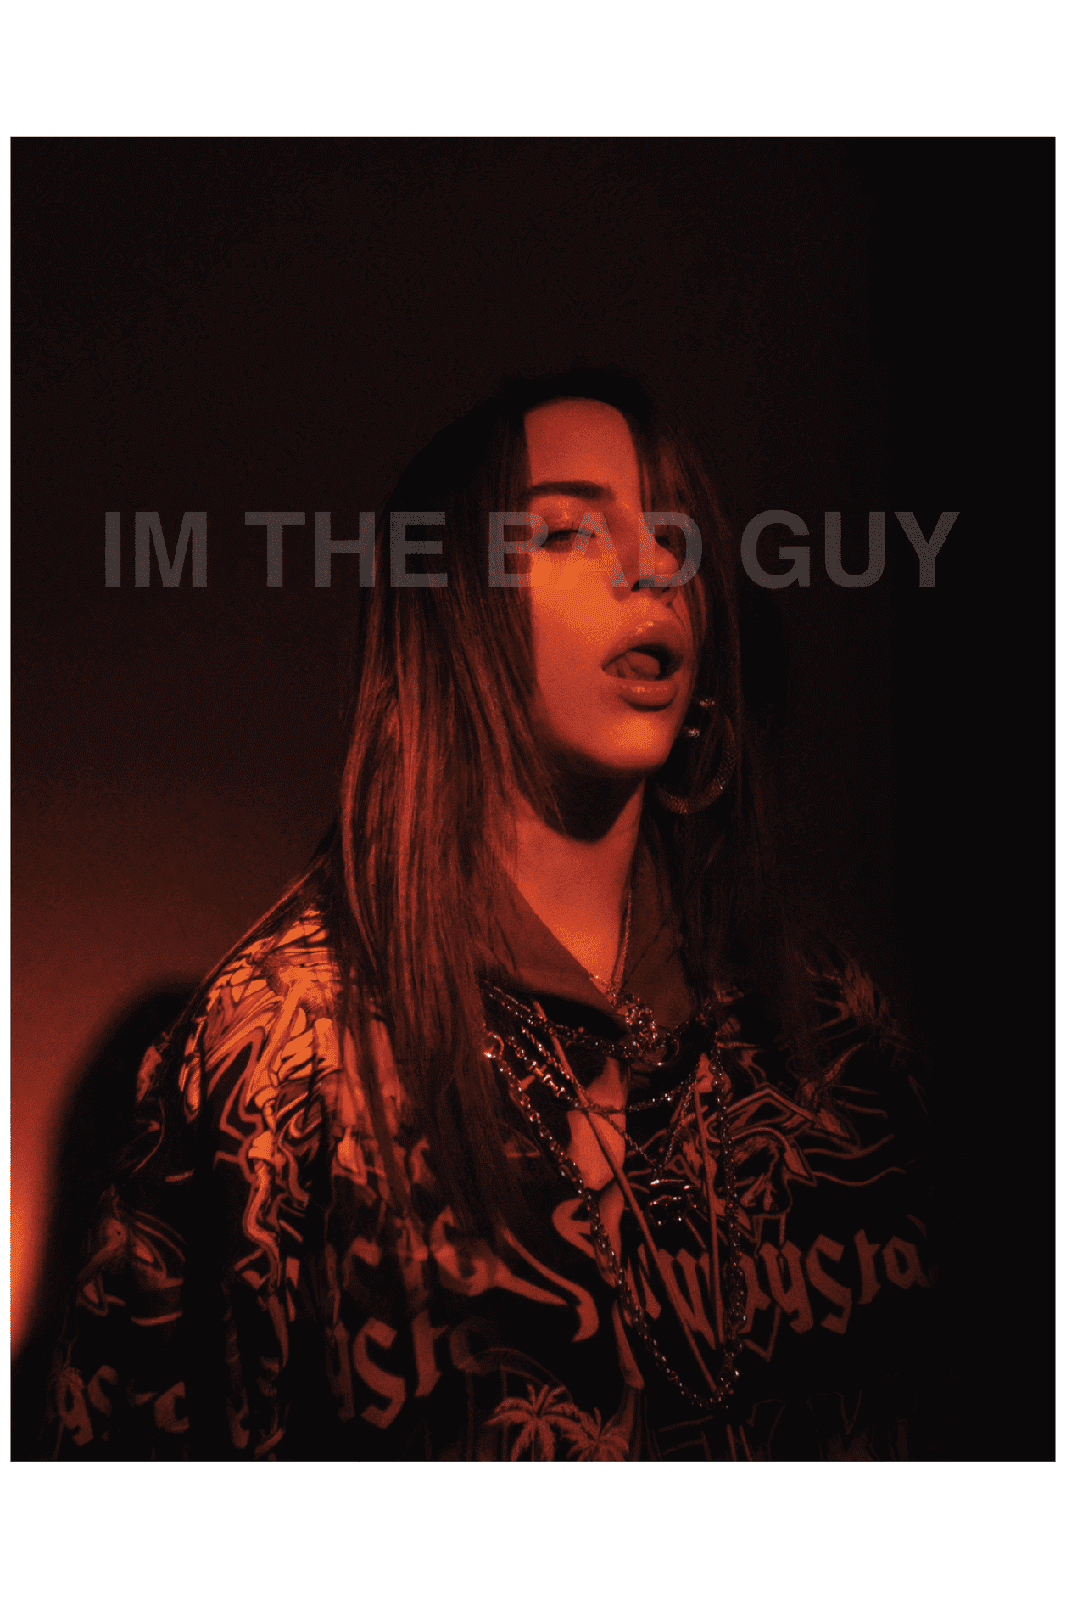 THE BAD GUY POSTER - PosterFi